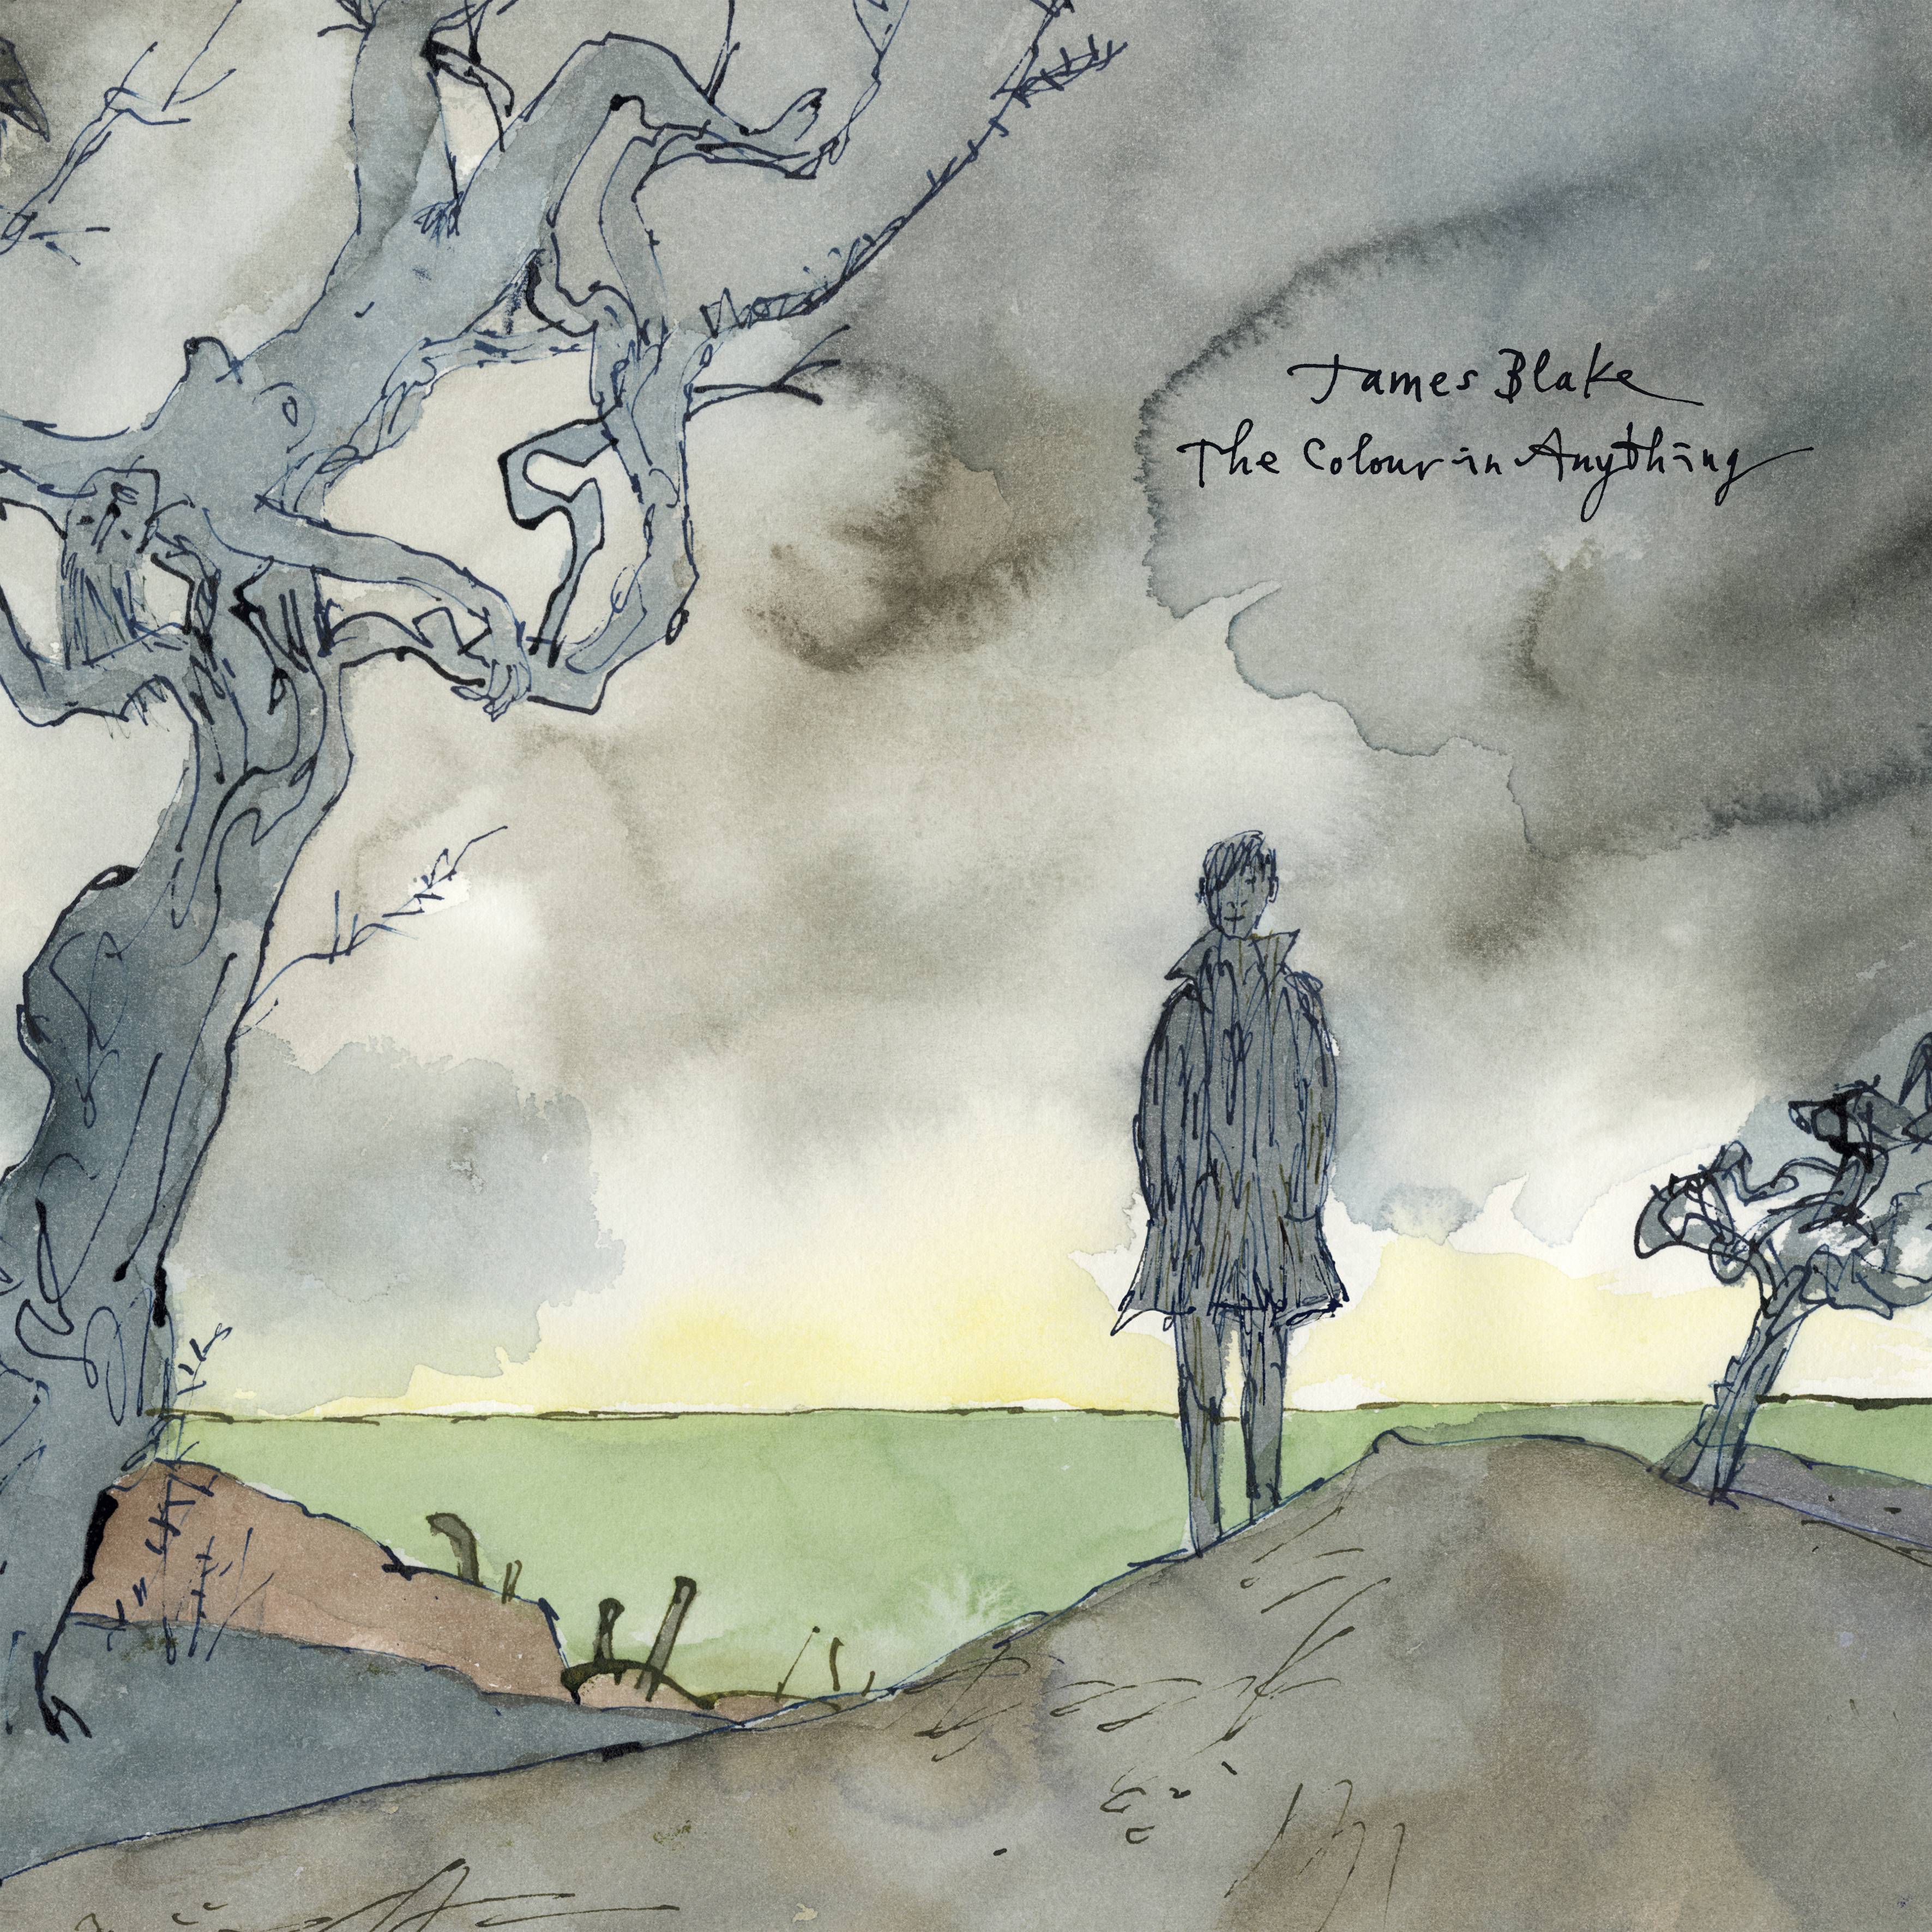 Surprise: James Blake's New Album 'The Colour in Anything' Comes Out Tonight